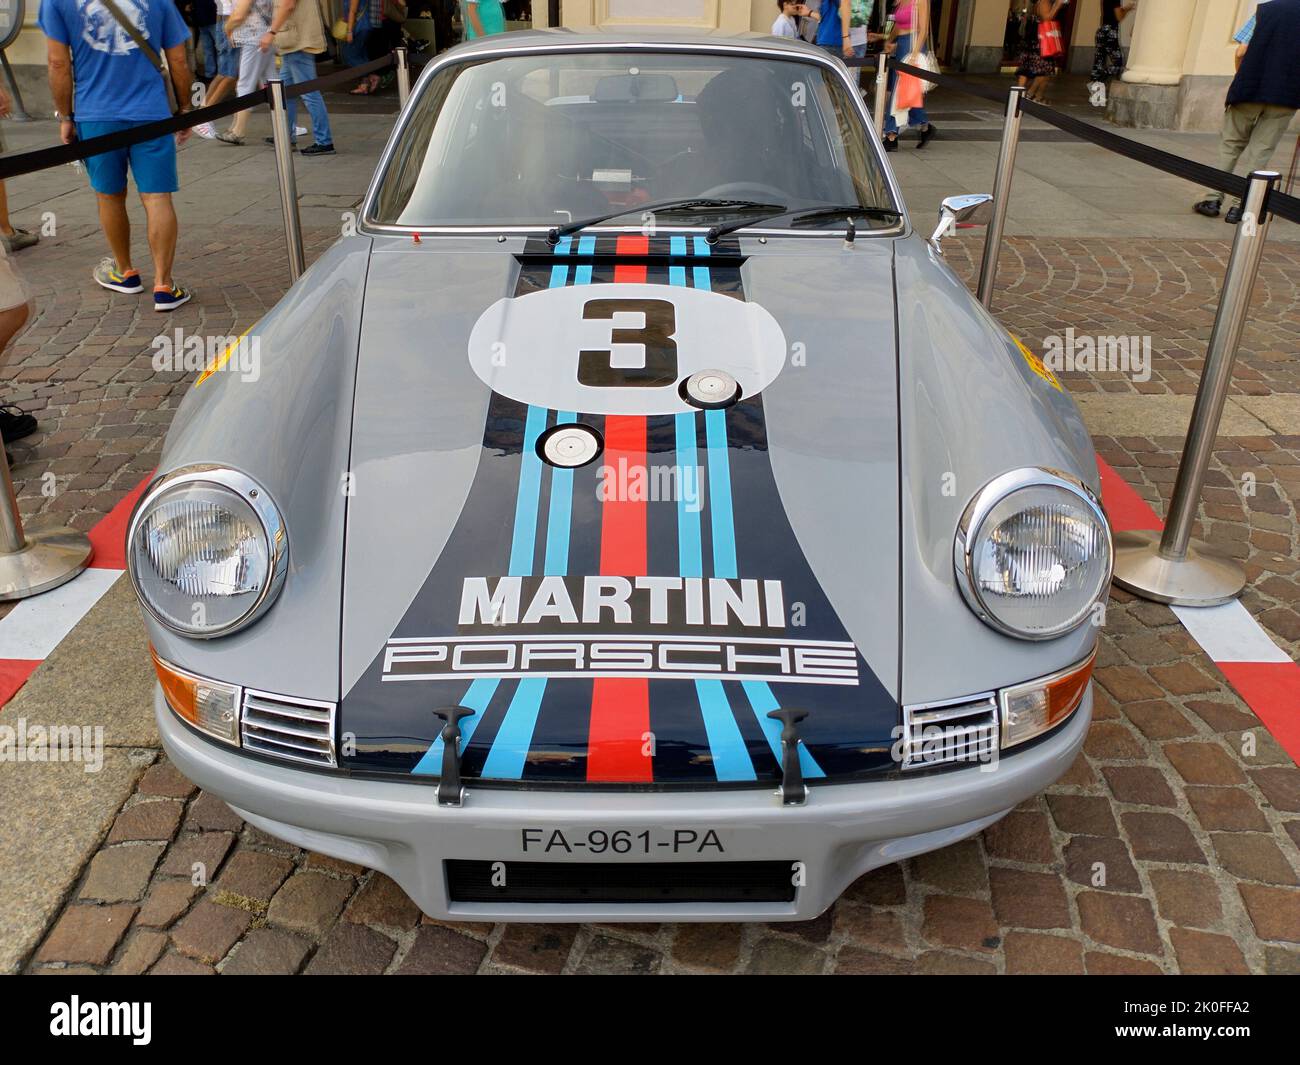 Italy Piedmont Turin 'Autolook Week Torino' - PORSCHE 911 2.8 RSR MARTINI Credit: Realy Easy Star/Alamy Live News Stock Photo